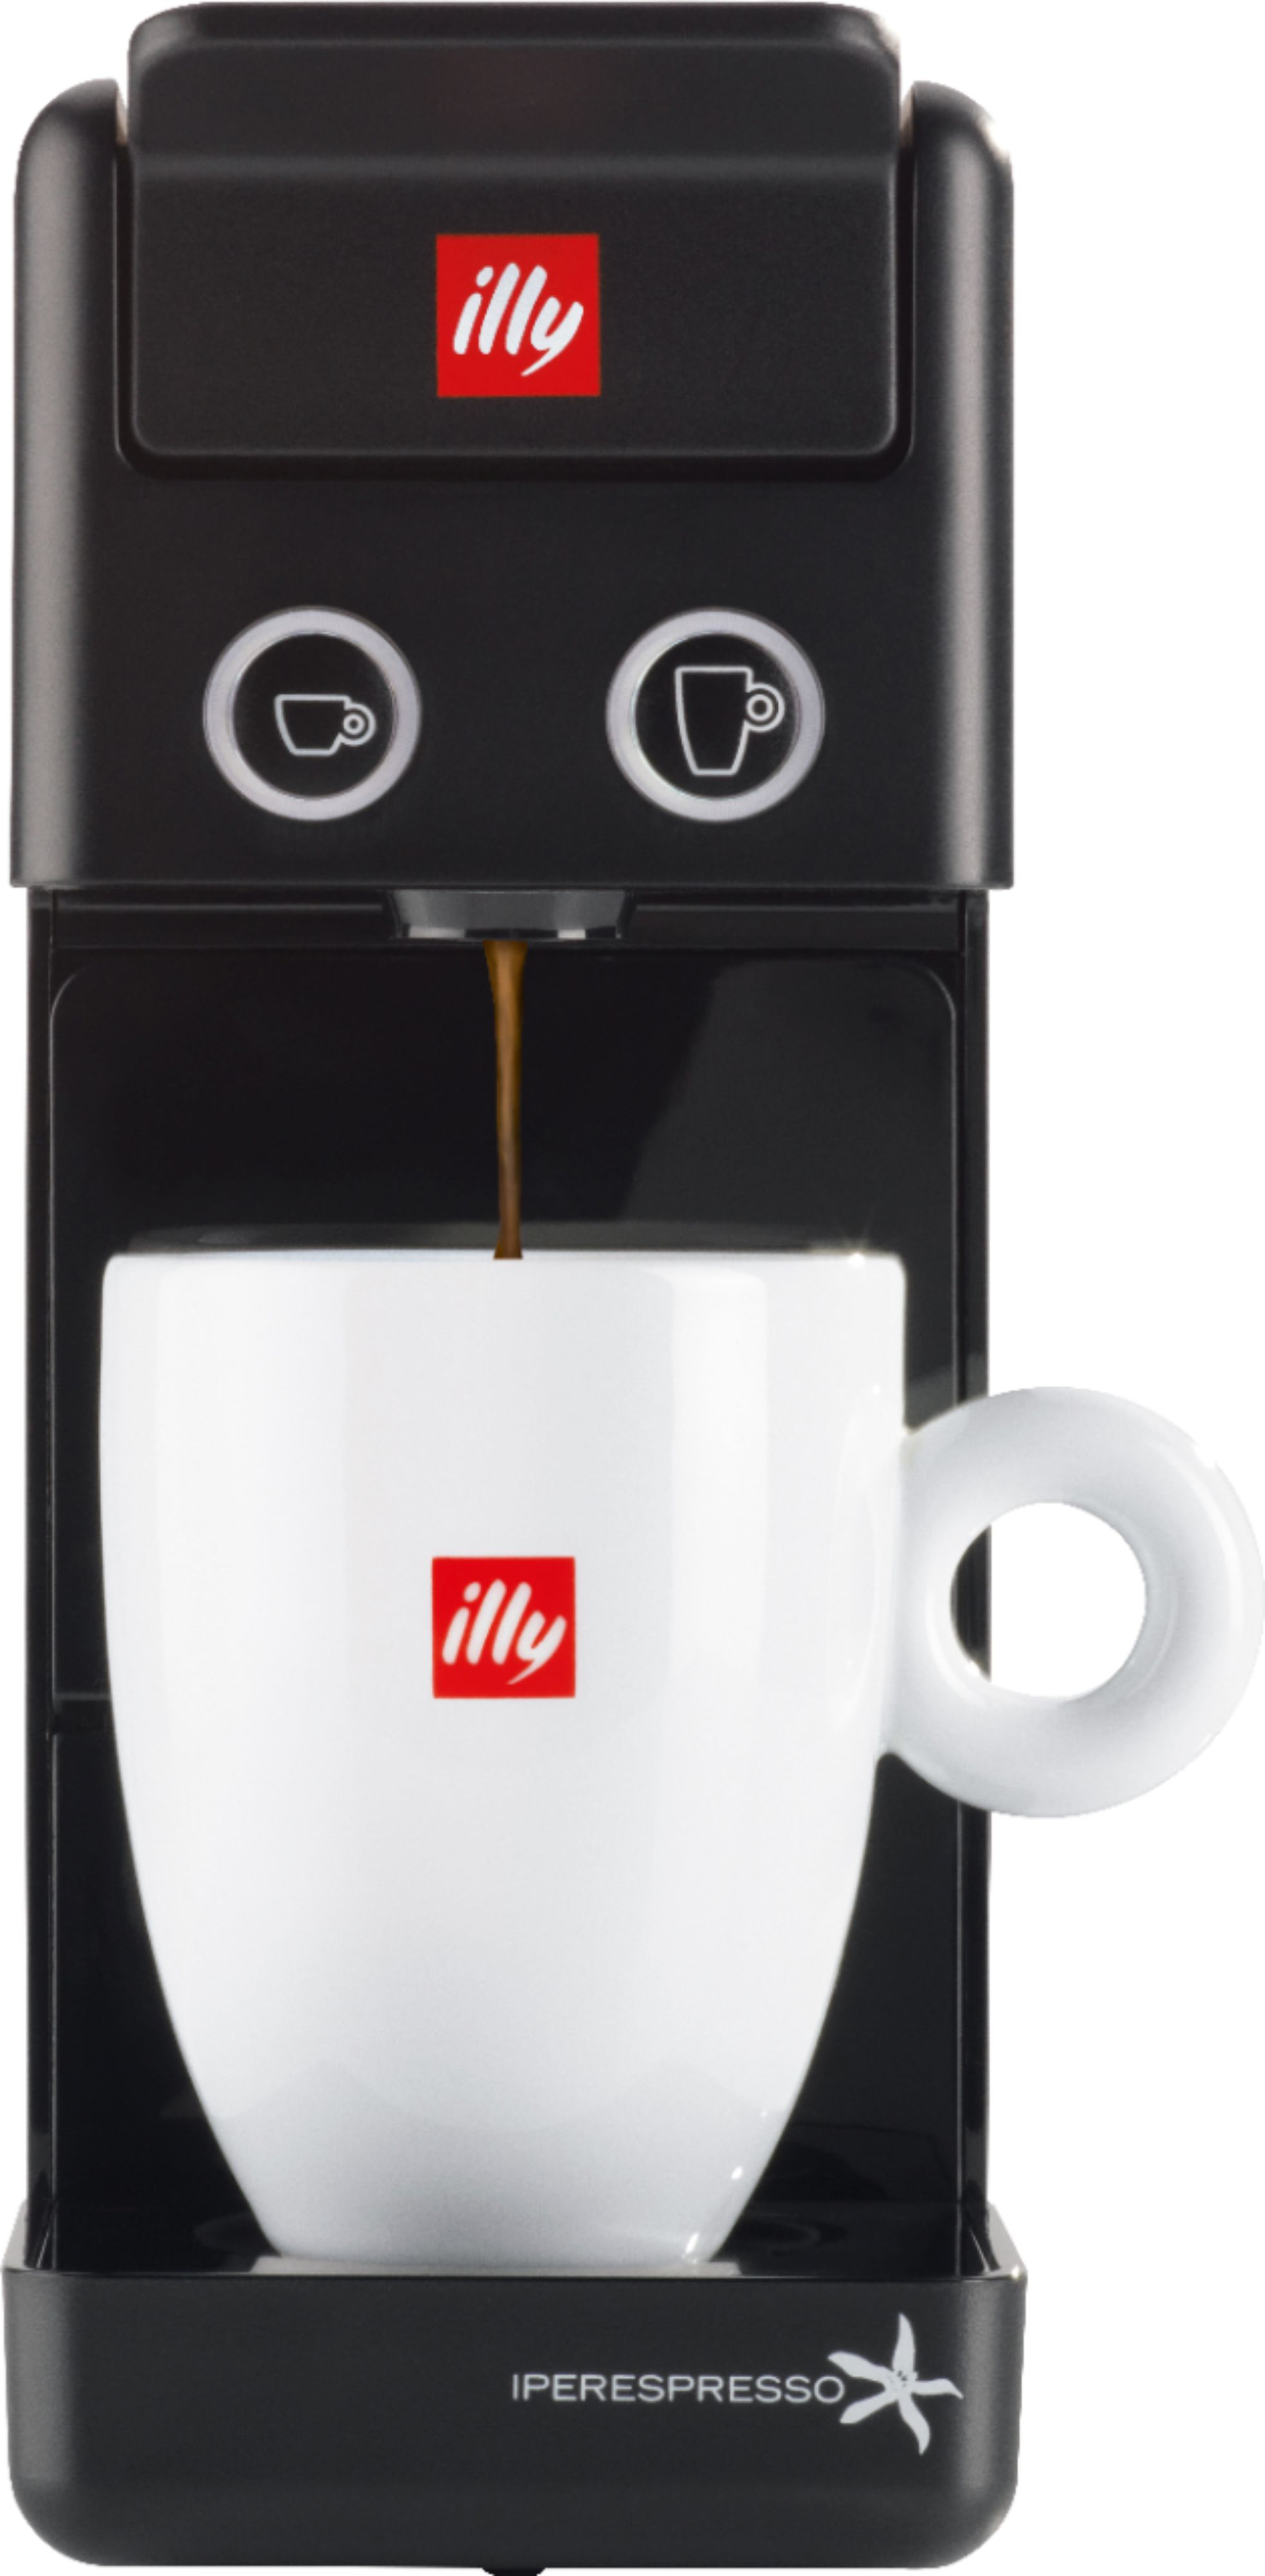 James Dyson wolf verband Best Buy: illy Y3.2 Single Serve Coffee Maker Black 60296